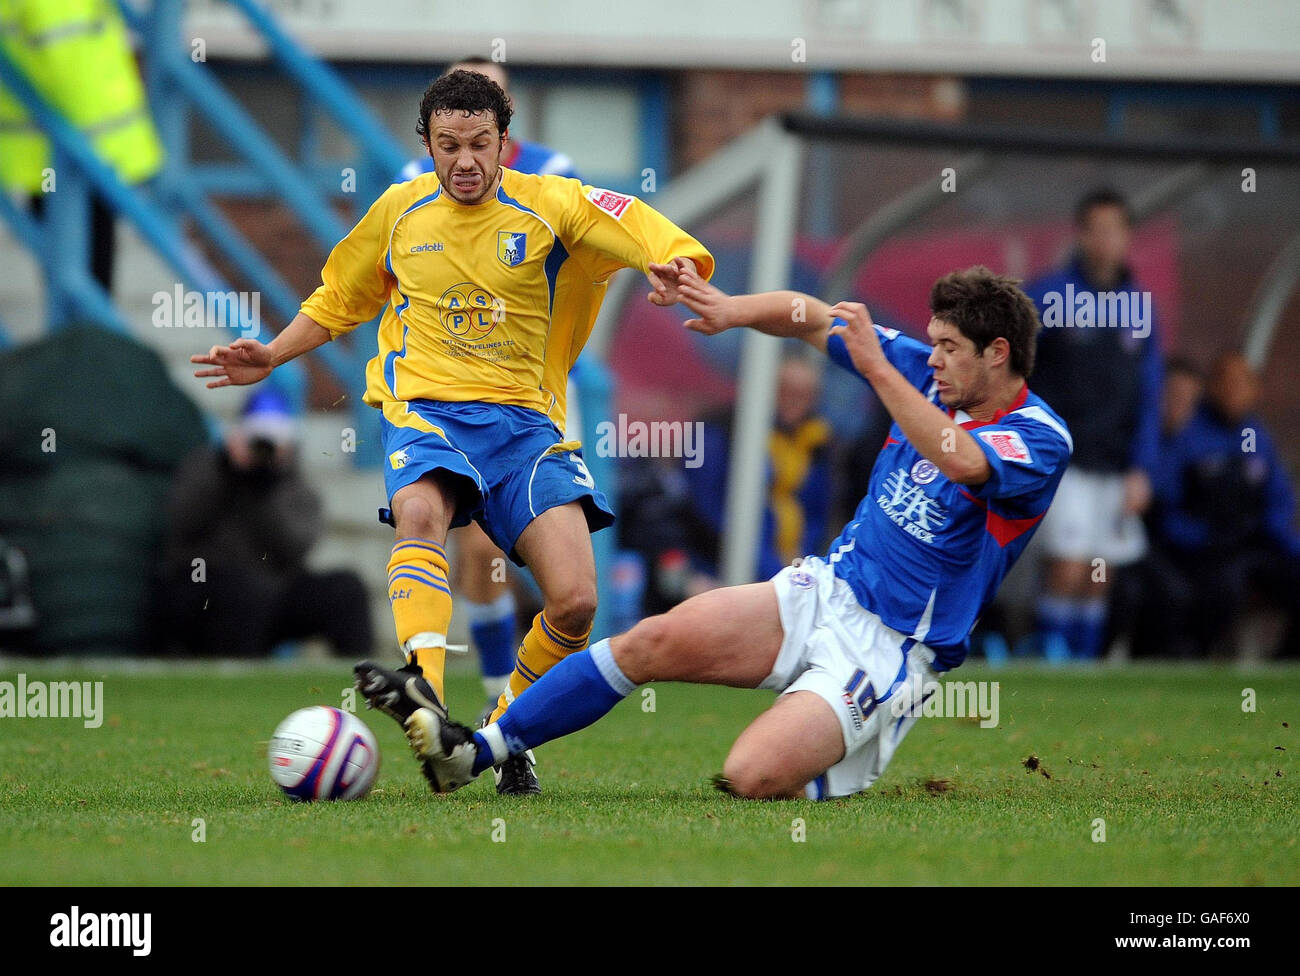 Soccer - Coca-Cola Football League Two - Chesterfield v Mansfield Town - Saltergate Stock Photo